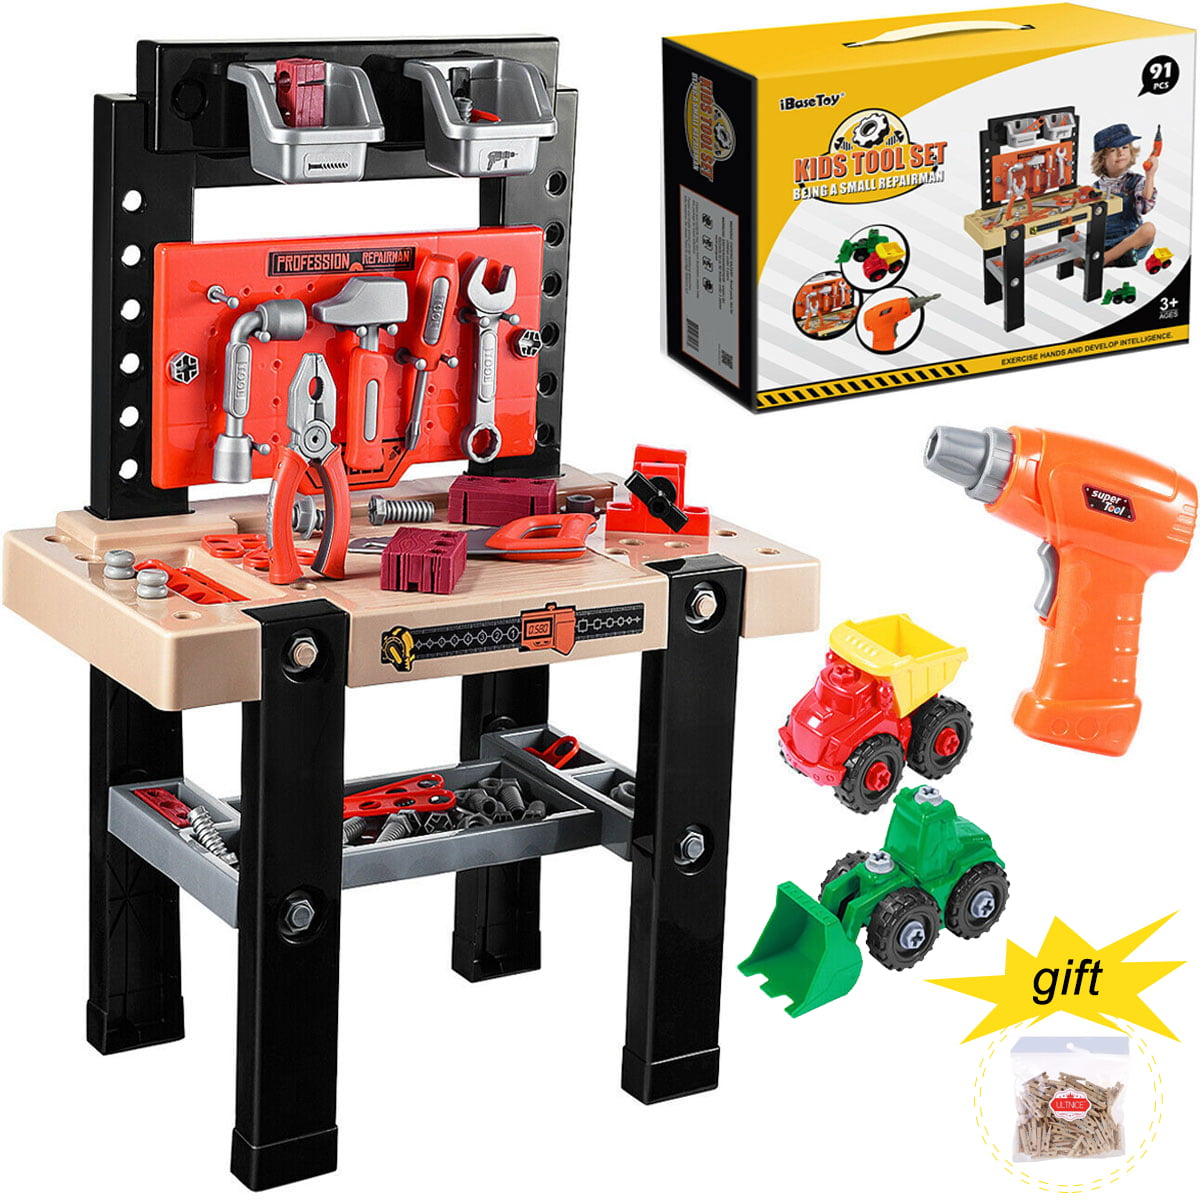 Kid Play Pretend Toy Tool Set Workbench Construction Workshop Toolbox Tools I7T6 